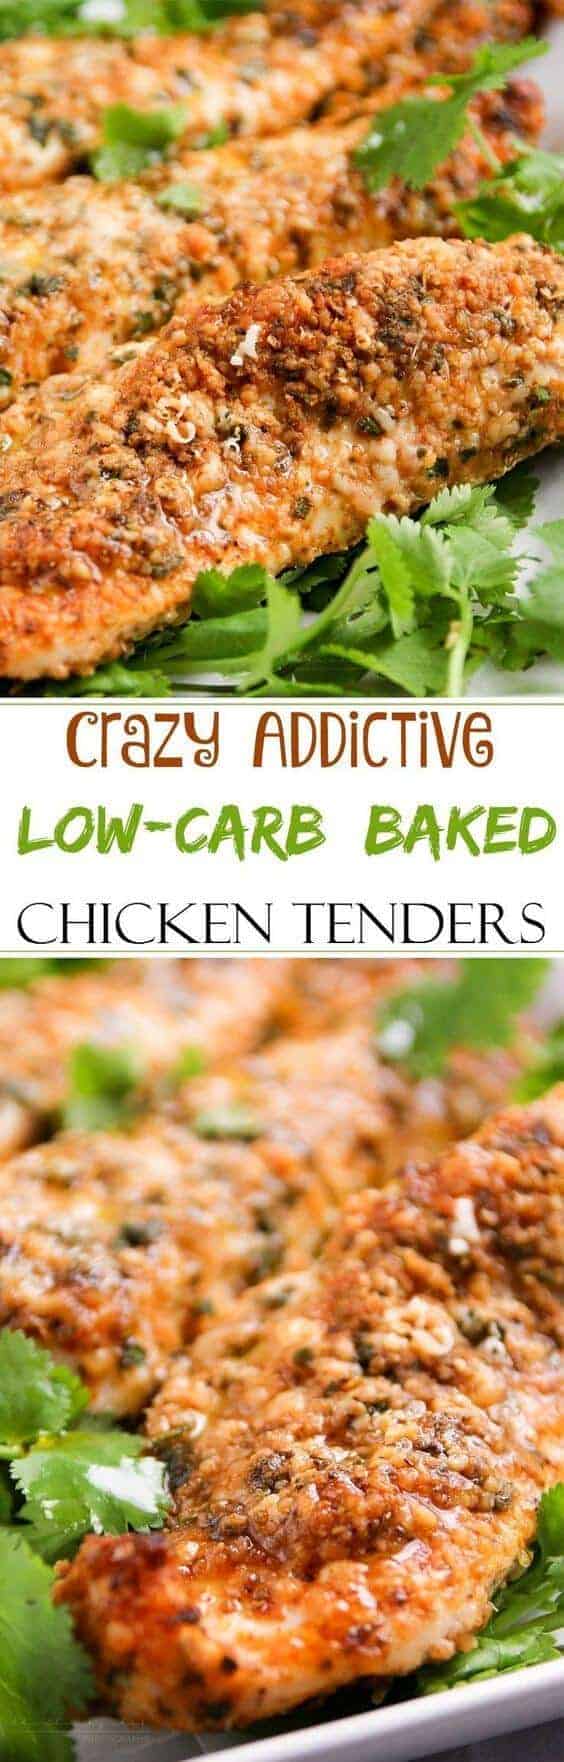 Low Carb Baked Chicken Tenders by The Chunky Chef | Favorite Low Carb Recipes